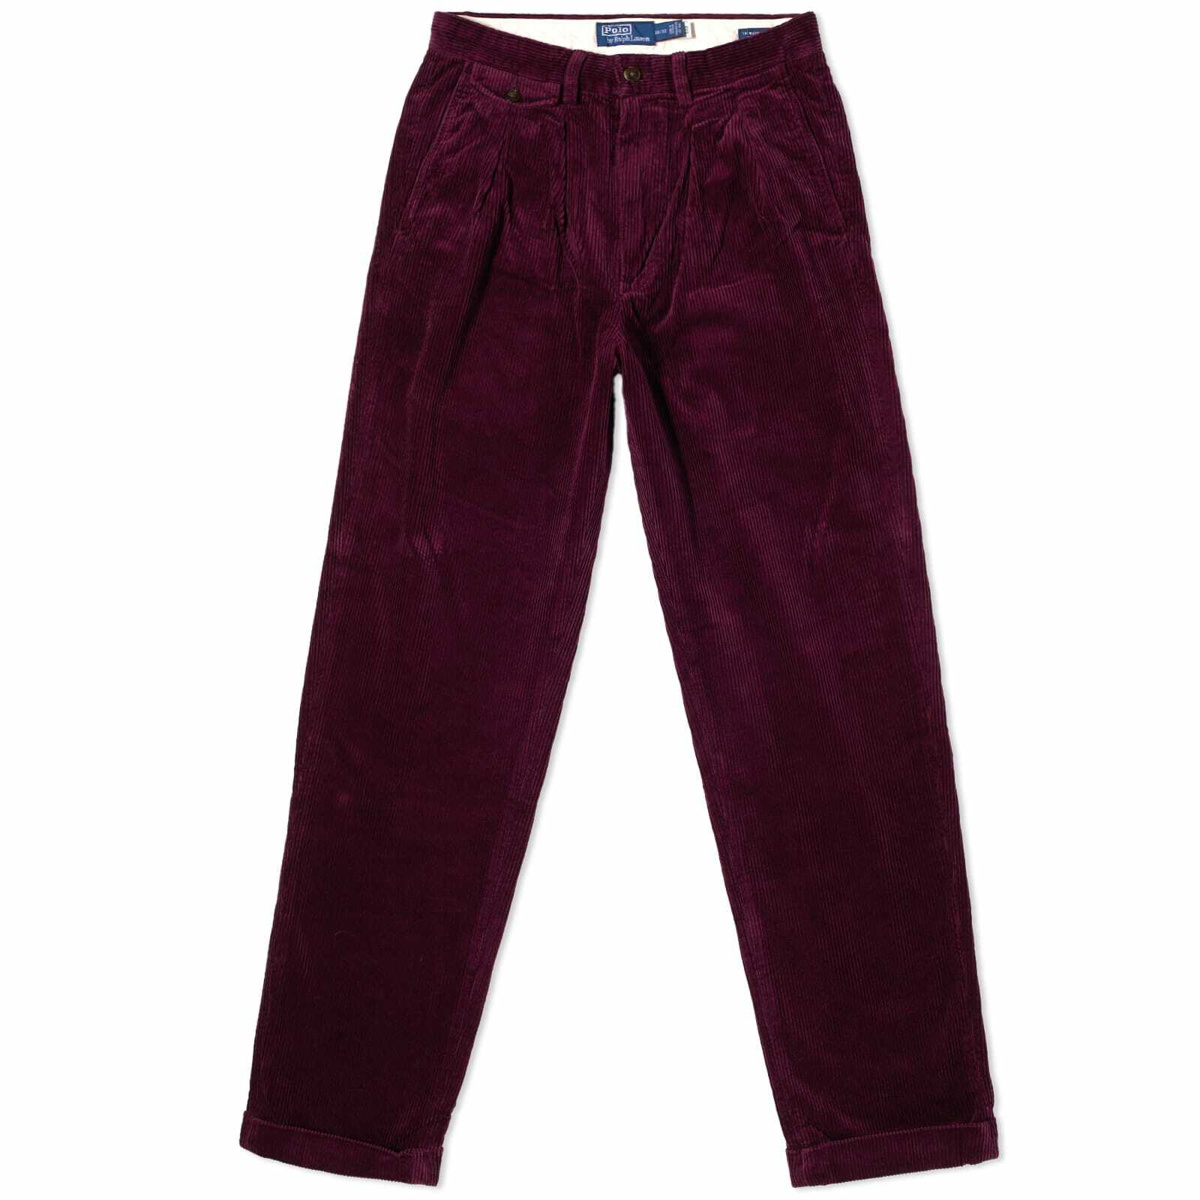 Polo Ralph Lauren Men's Pleated Corduroy Pant in Ruby Polo Ralph